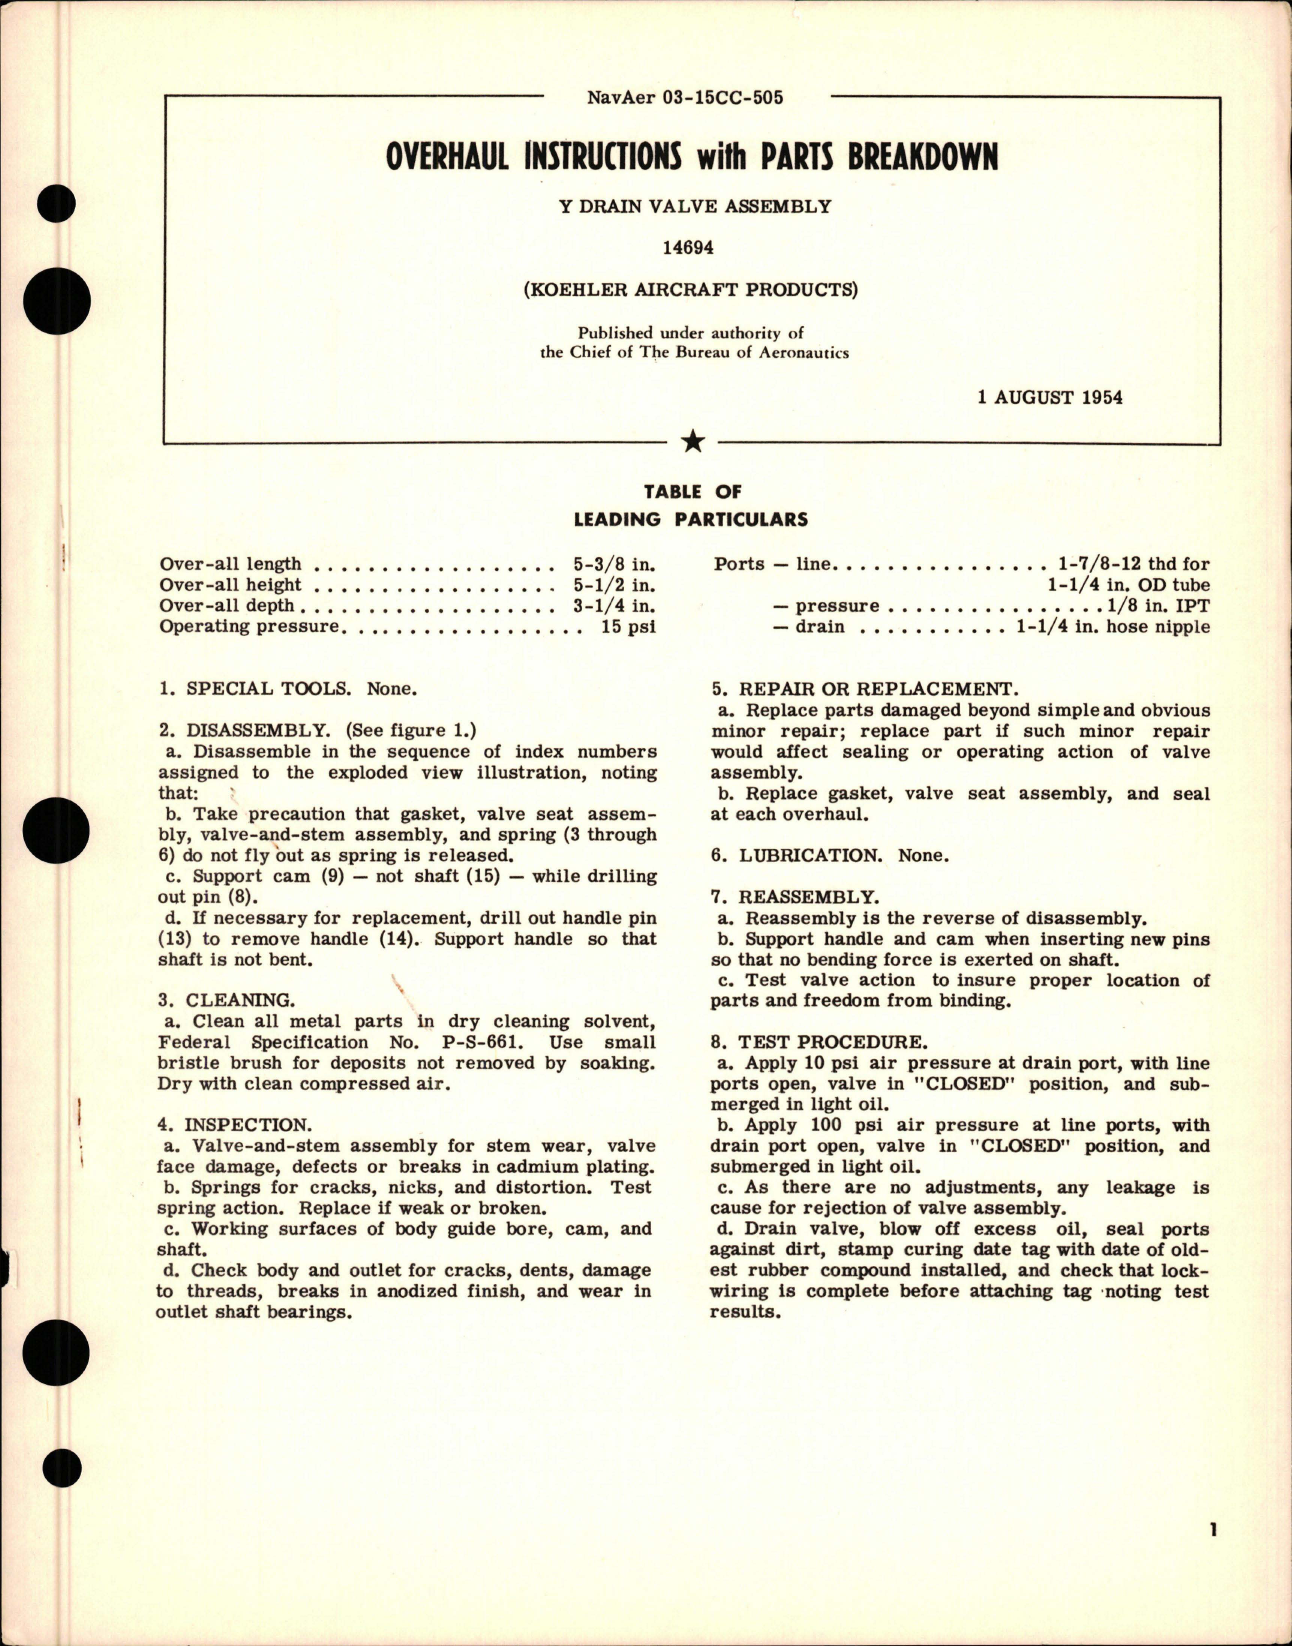 Sample page 1 from AirCorps Library document: Overhaul Instructions with Parts Breakdown for Y Drain Valve Assembly - Part 14694